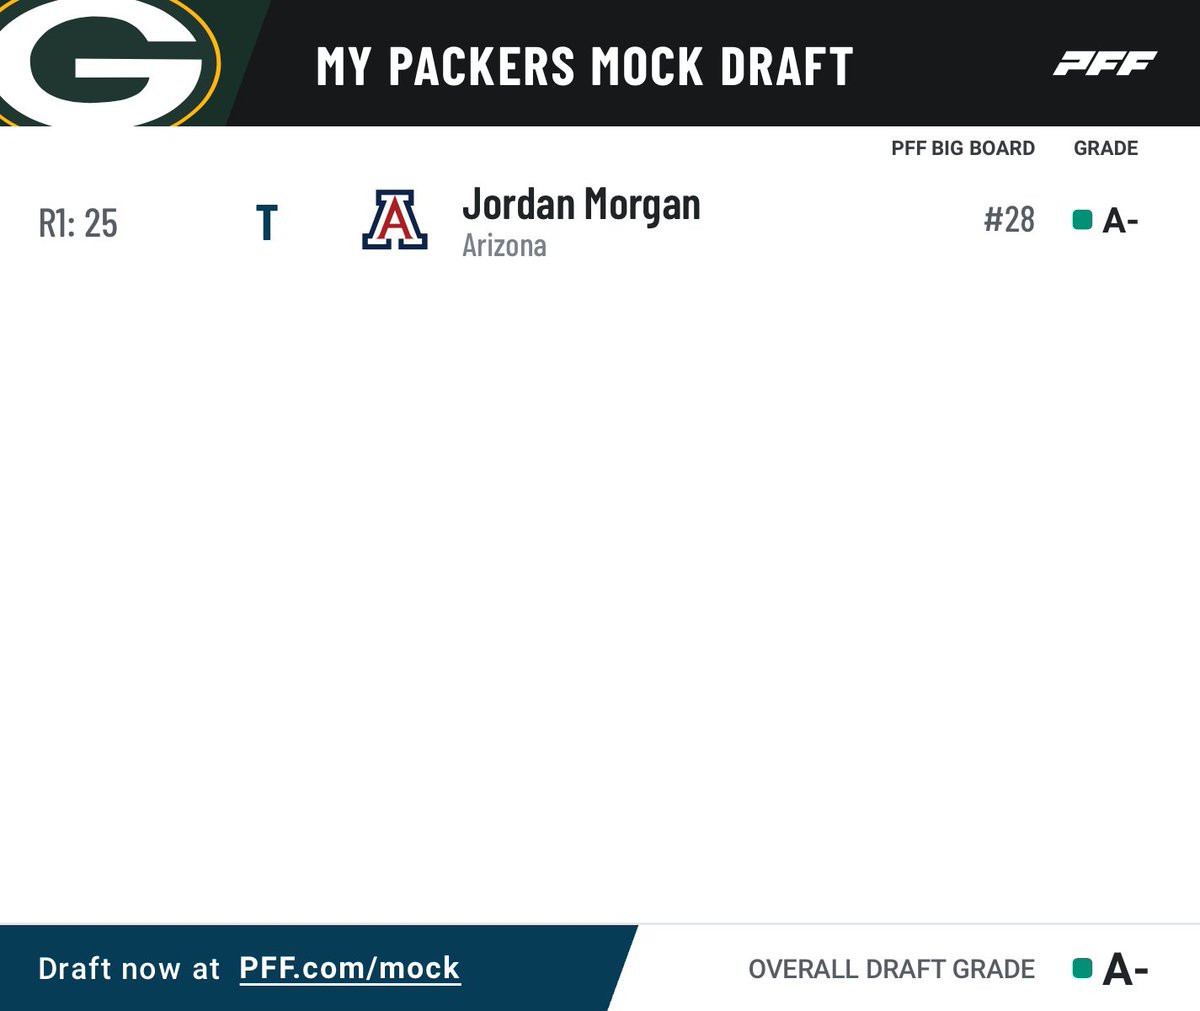 Welcome to the off season, Packers fans🧀 Create your own mock drafts⬇️ pff.com/mock